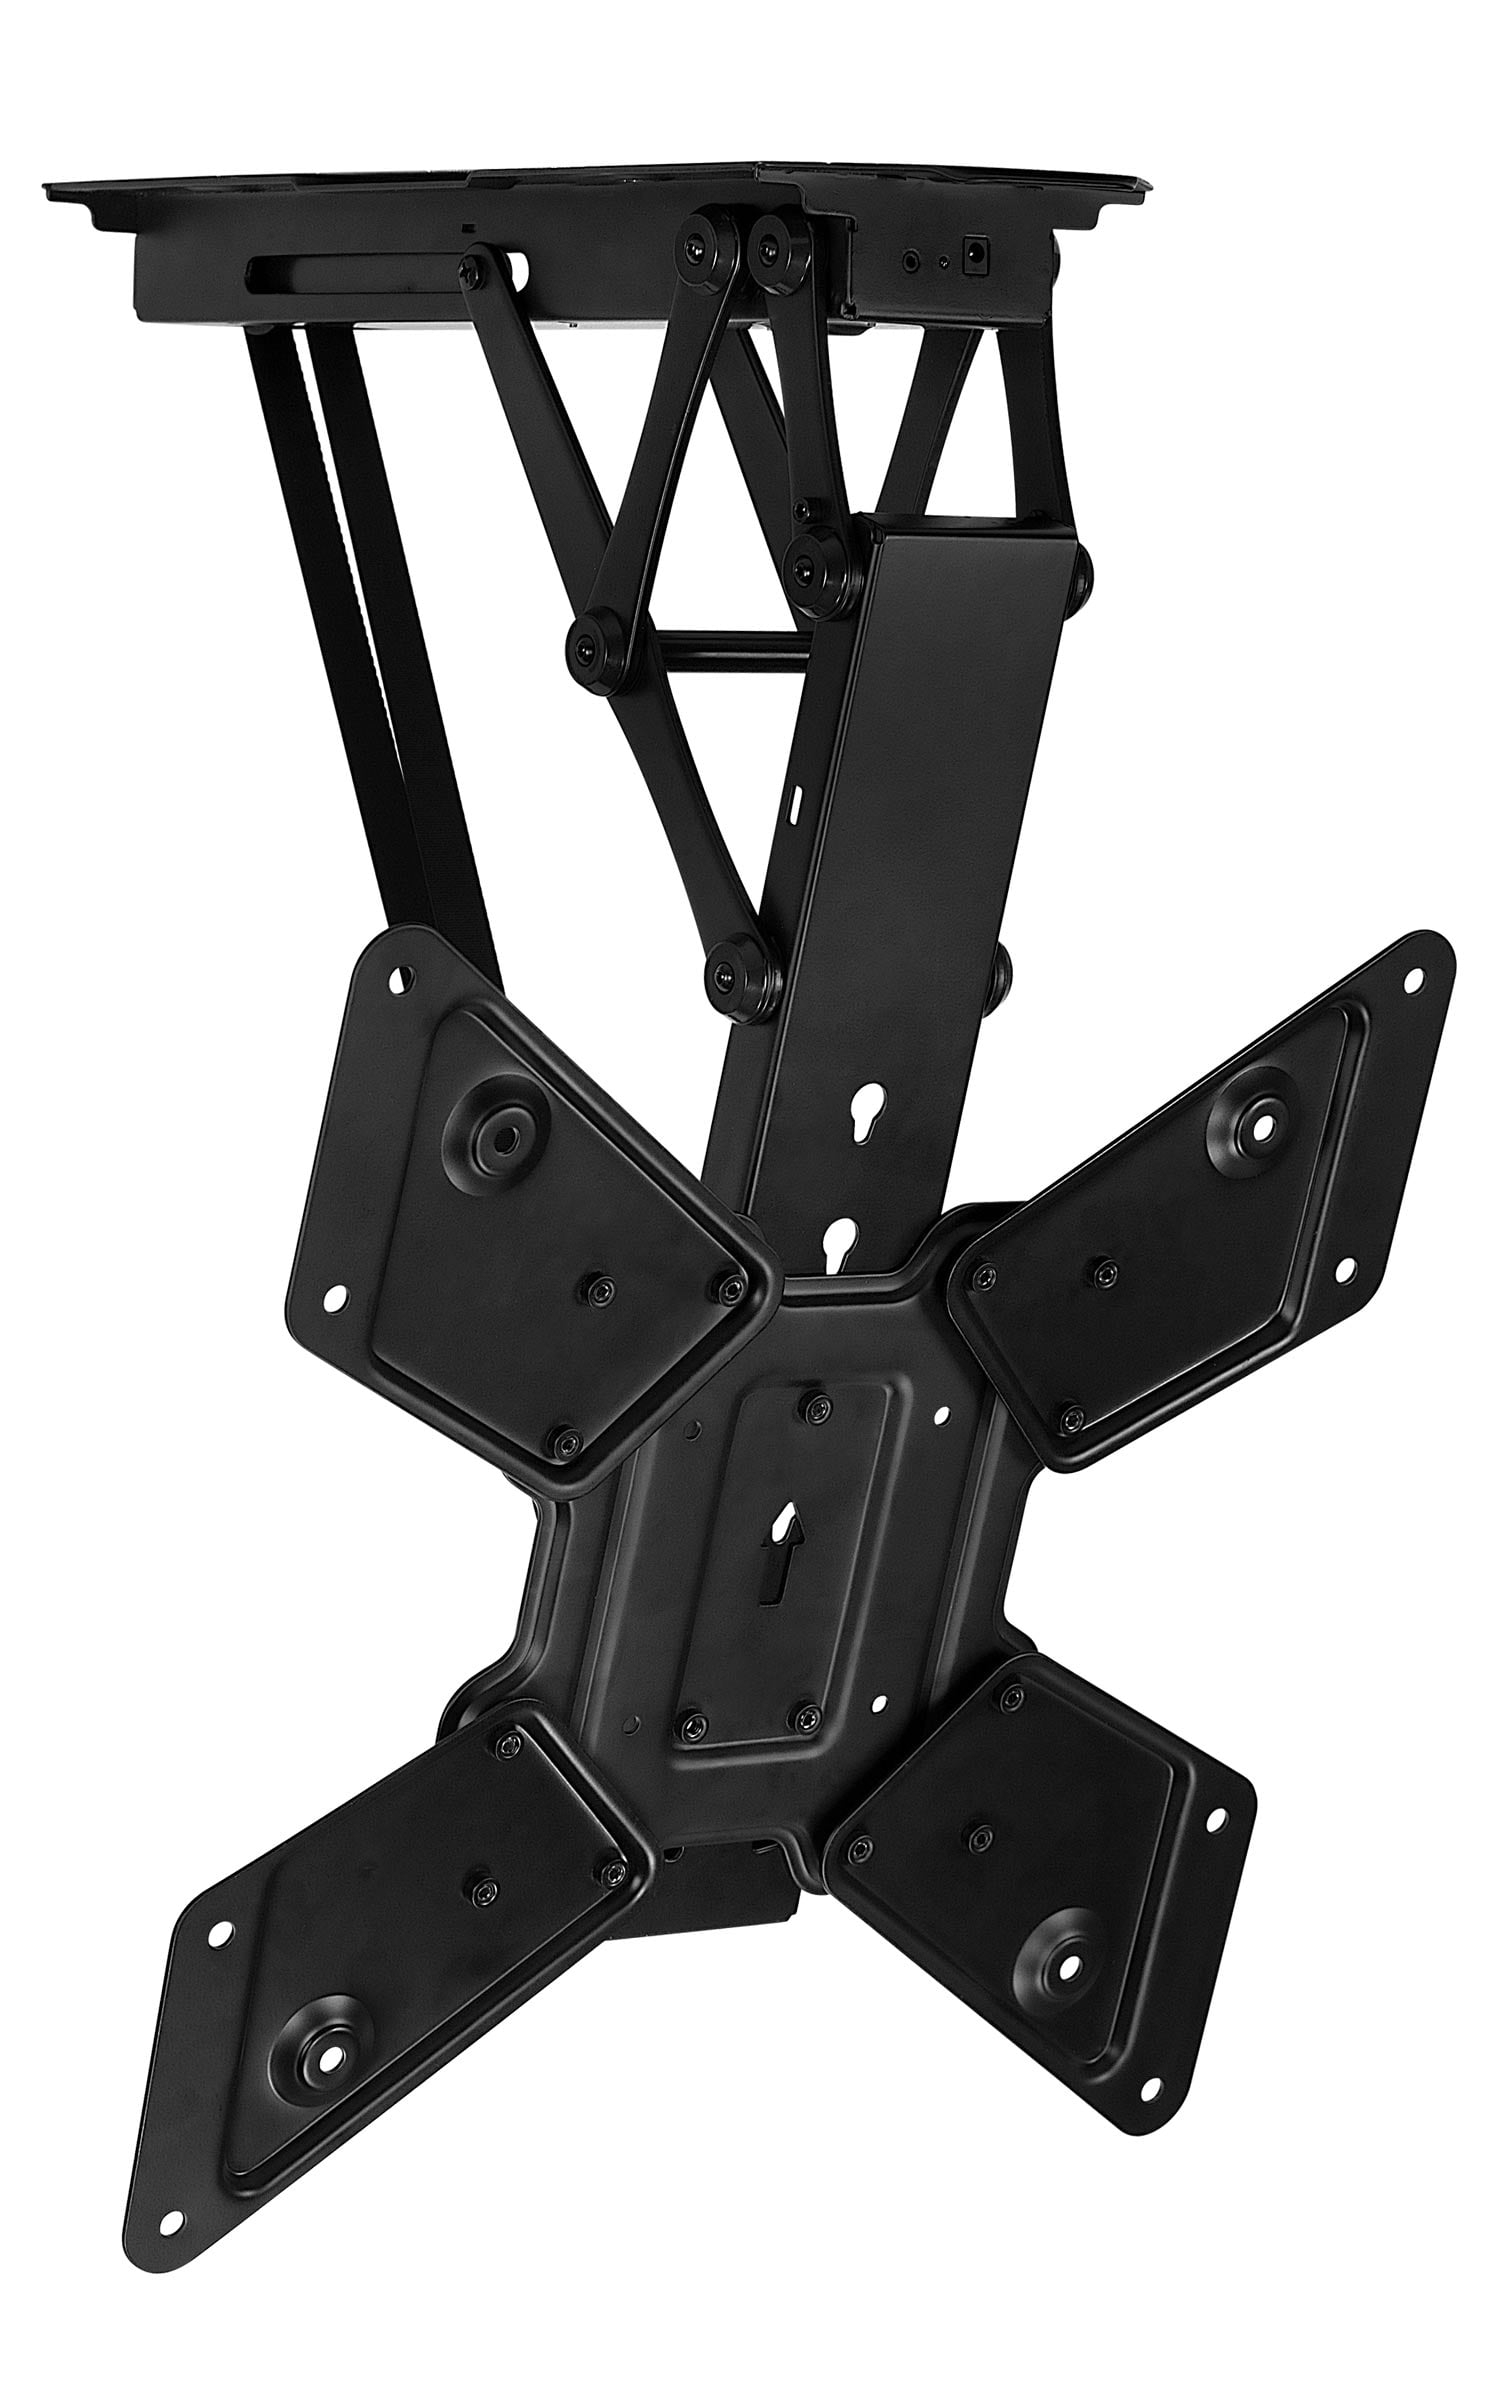 Mount-it! Motorized Ceiling TV Mount with Remote Fits 32" to 55" | Down Pitched Roof - Walmart.com